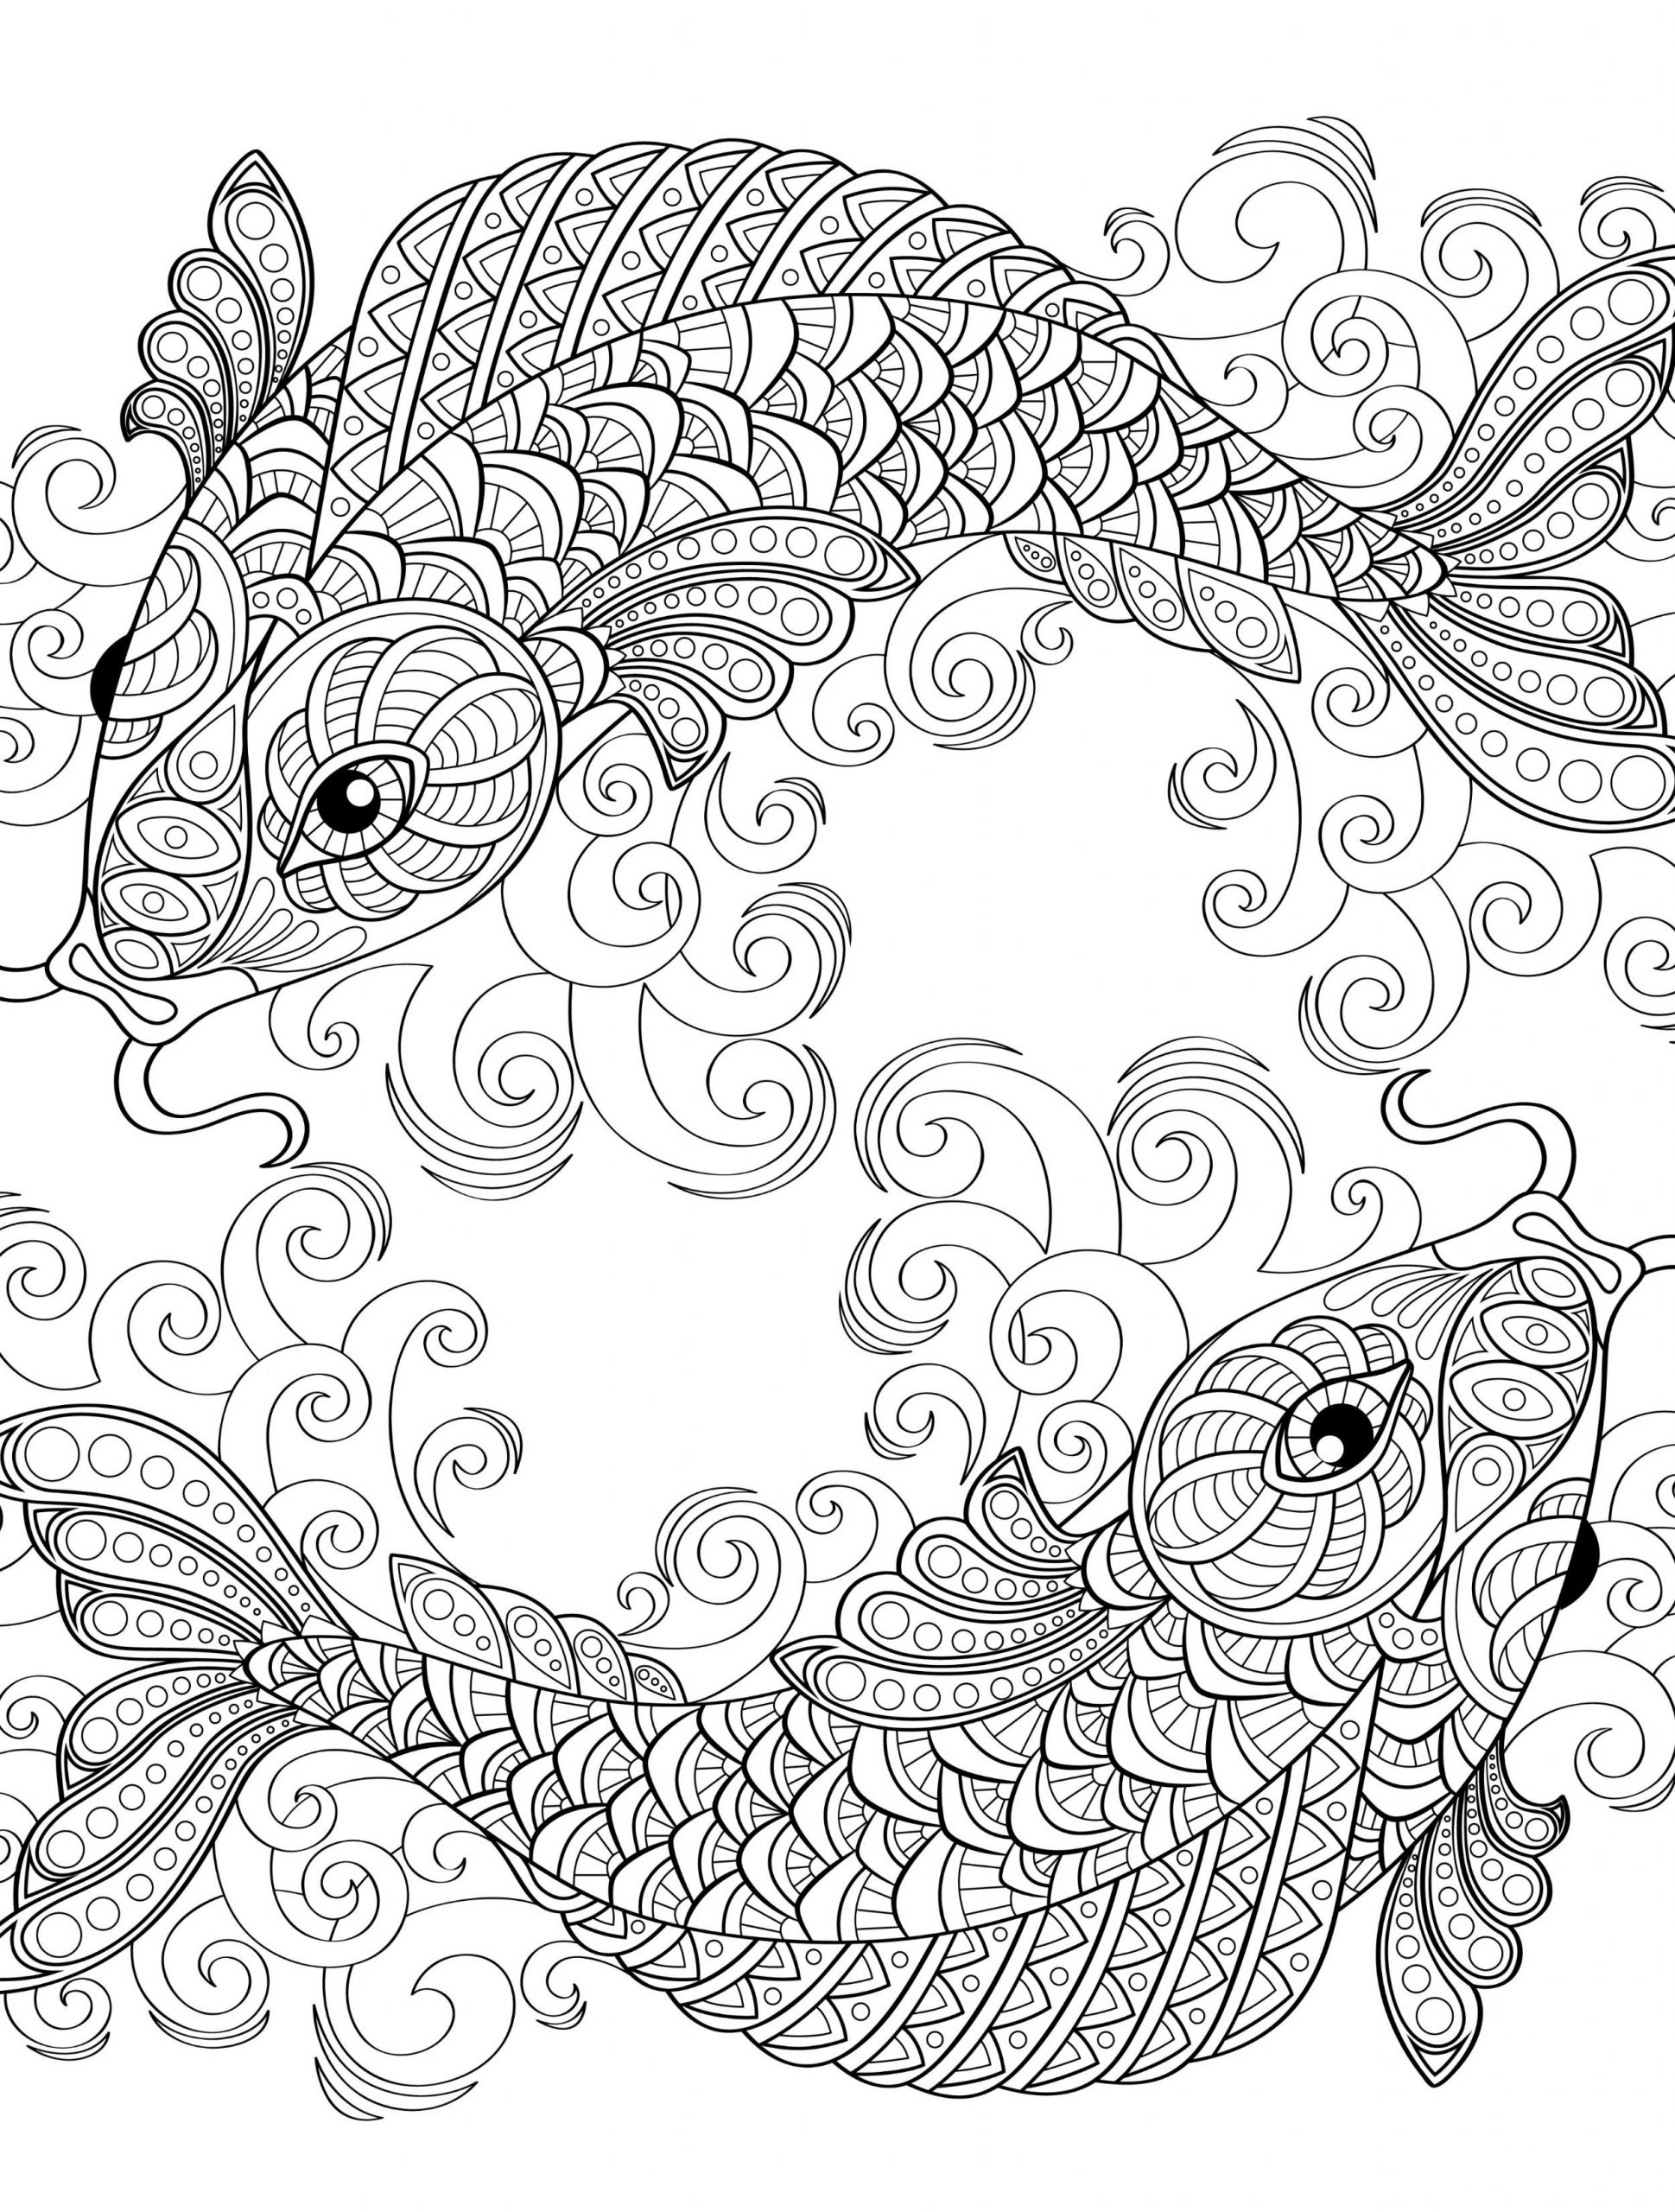 Coloring Book For Adults
 Pin on coloring